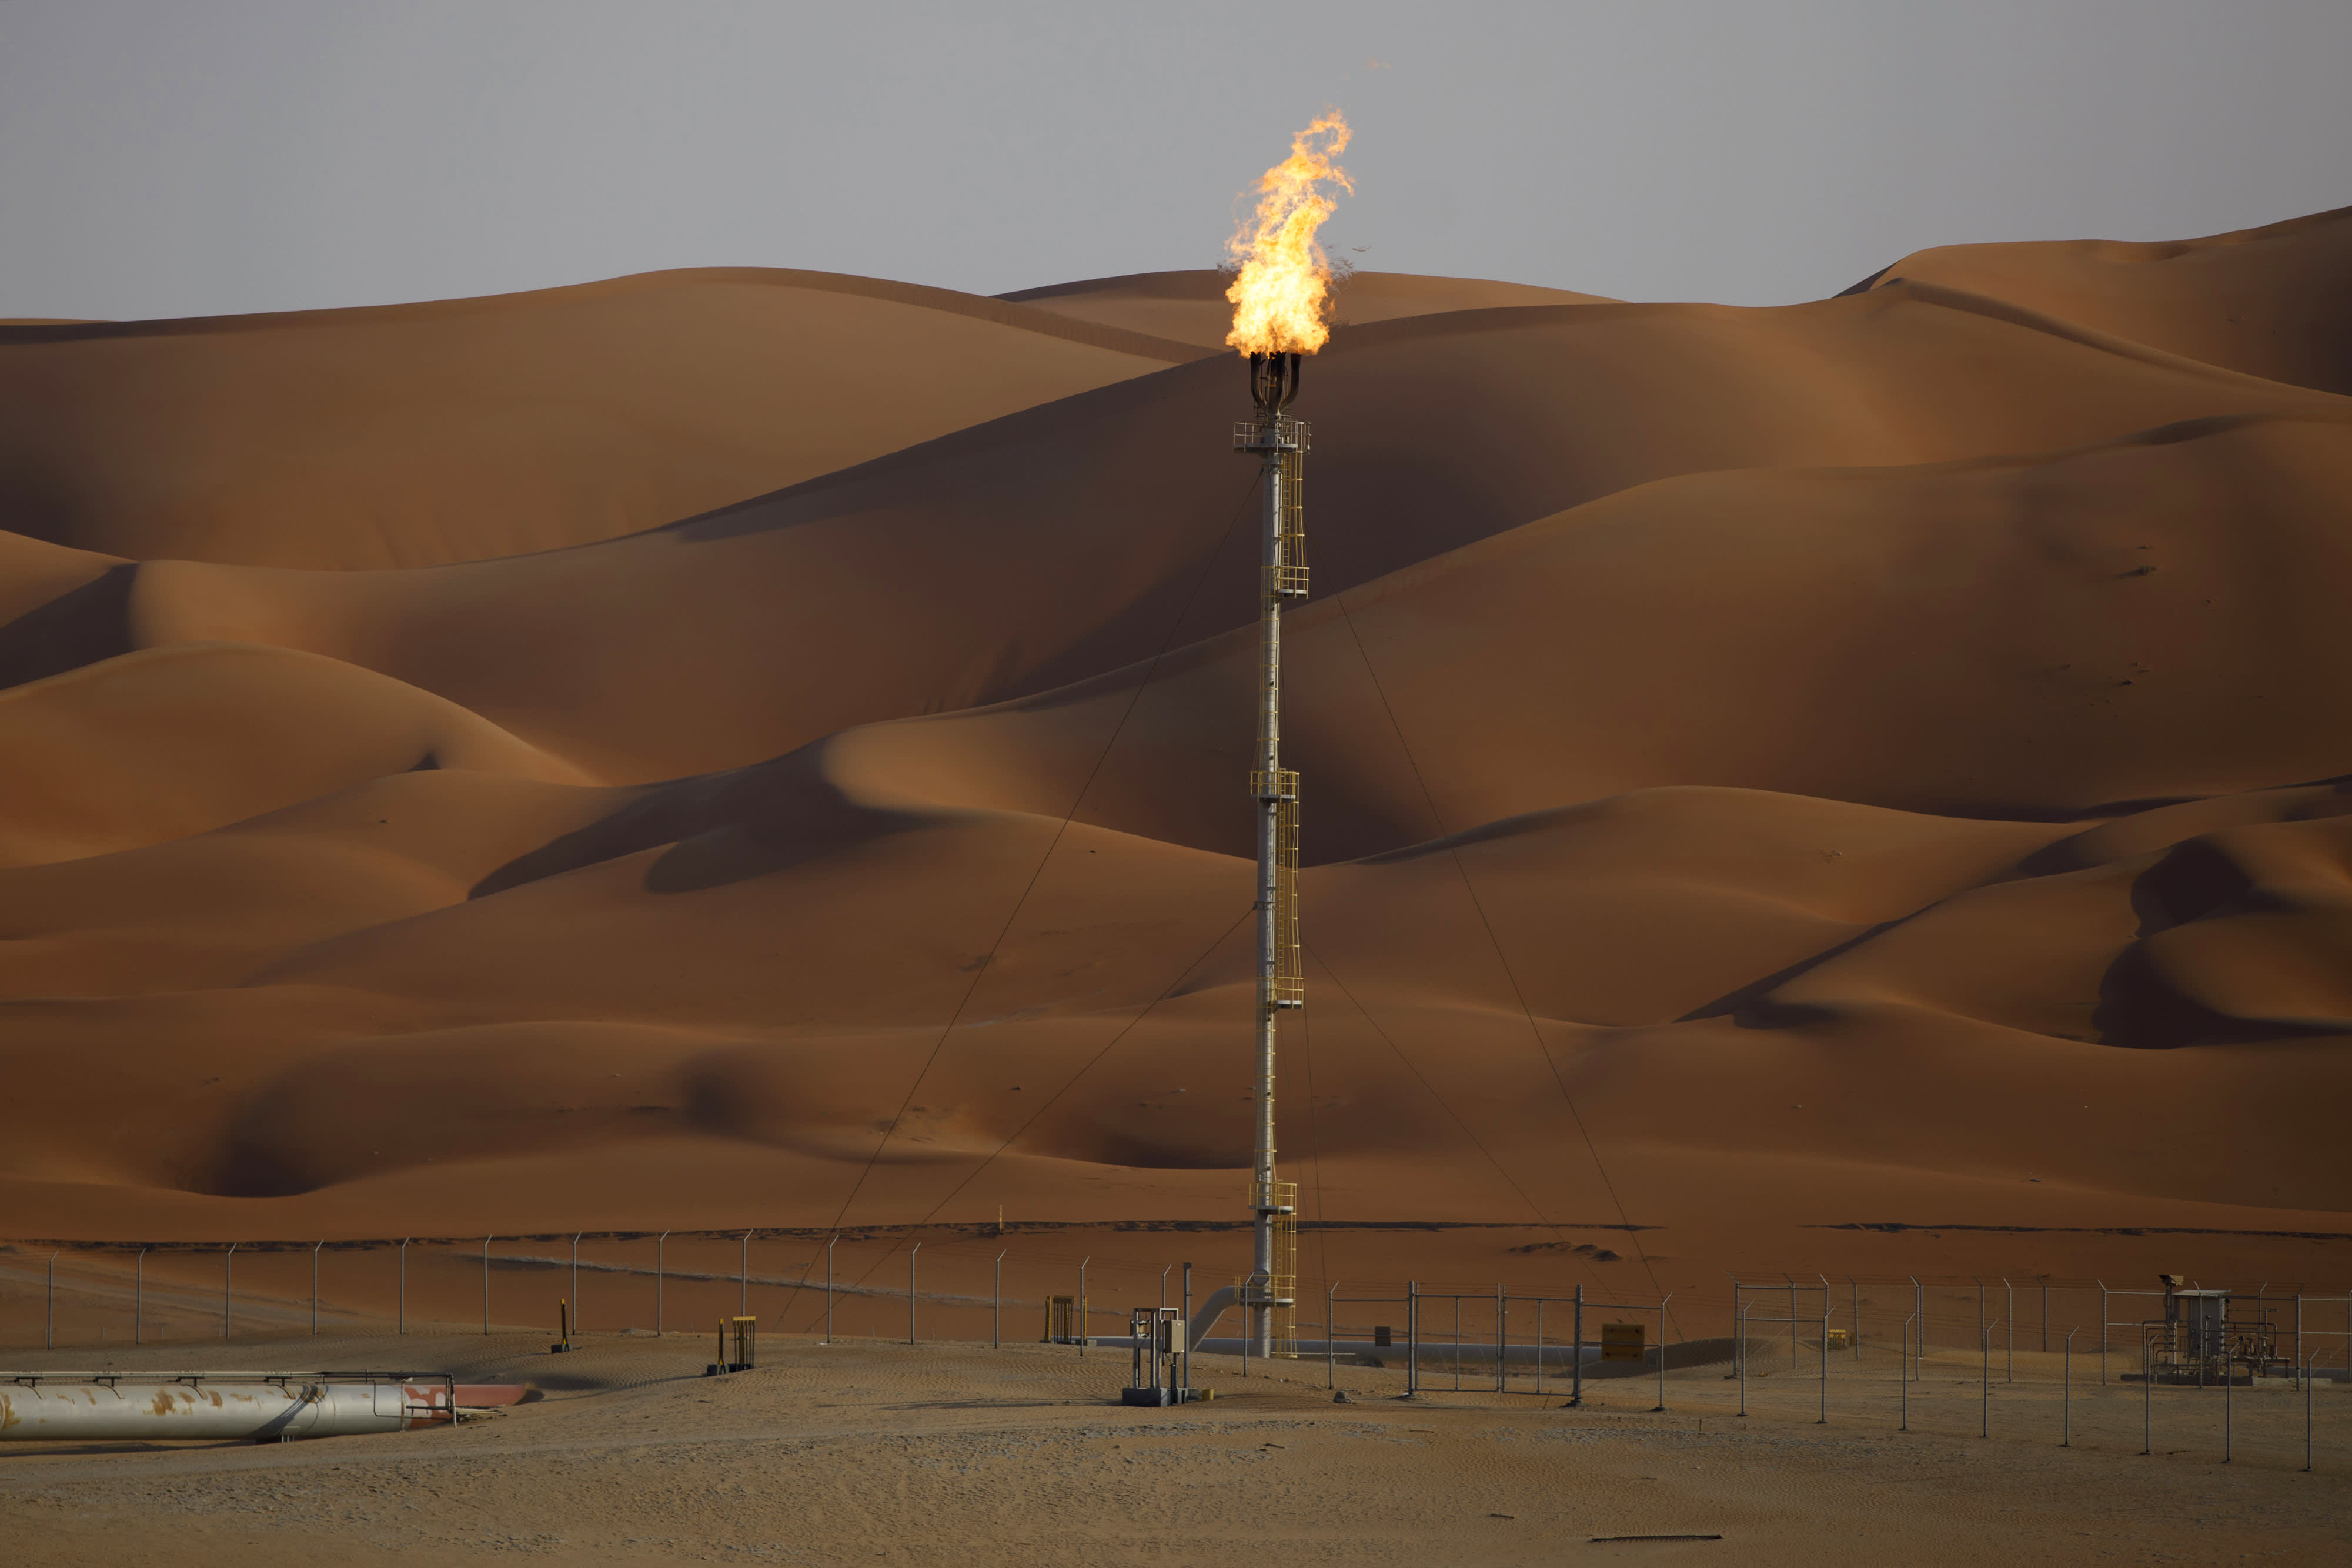 Oil is rising due to fears of rising tensions in the Middle East